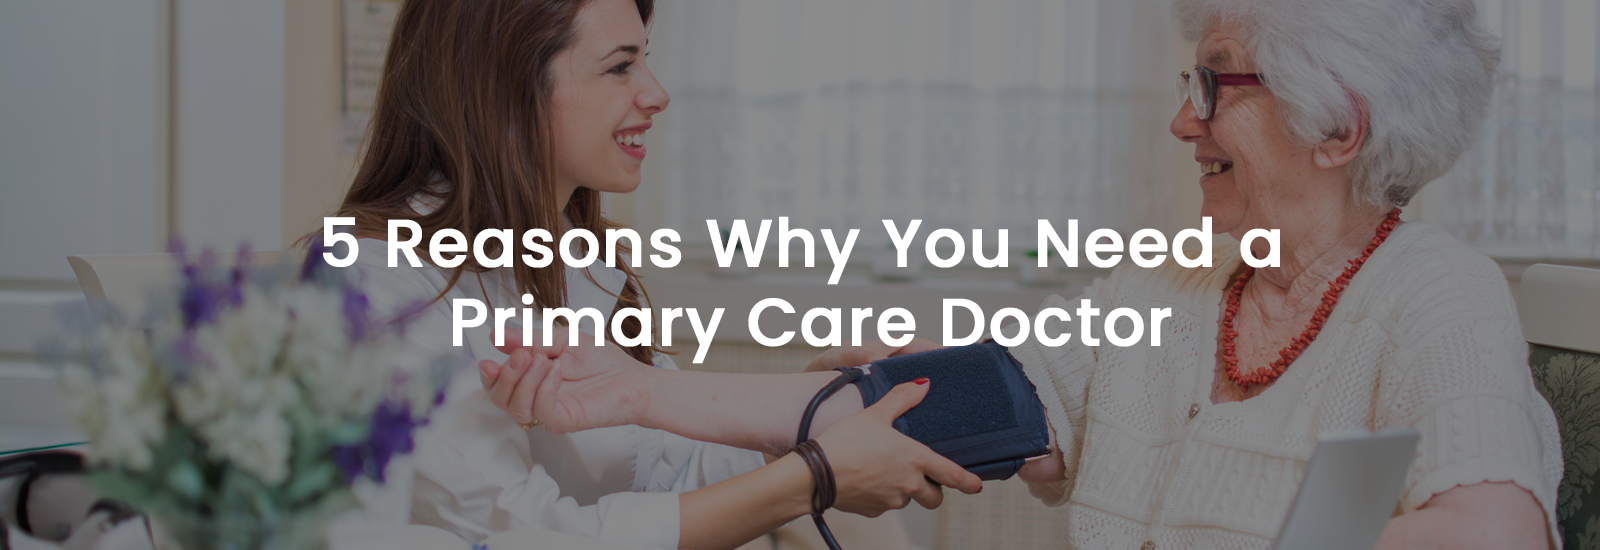 5 Reasons Why You Need a Primary Care Doctor | Banner Image